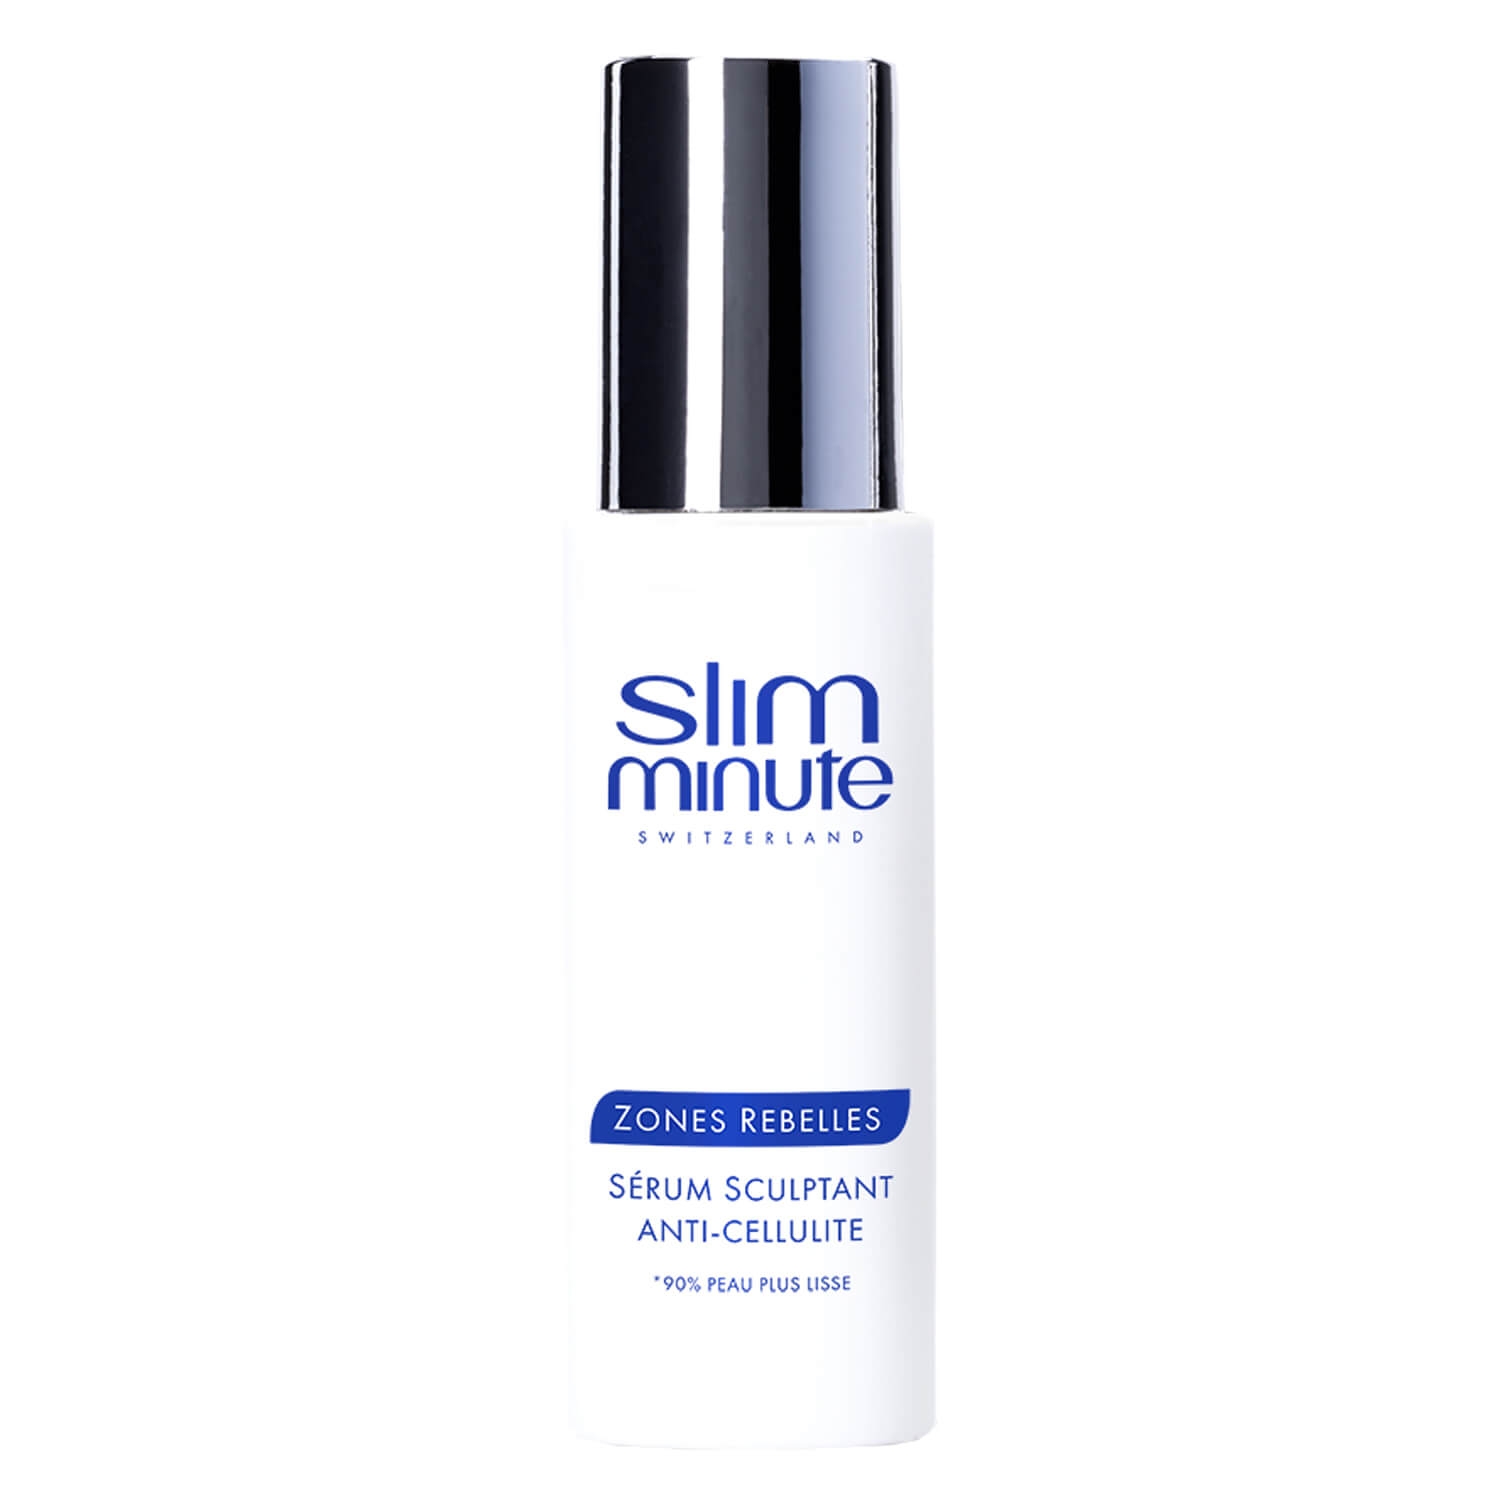 Product image from slimminute - Anti-Celluliten Serum